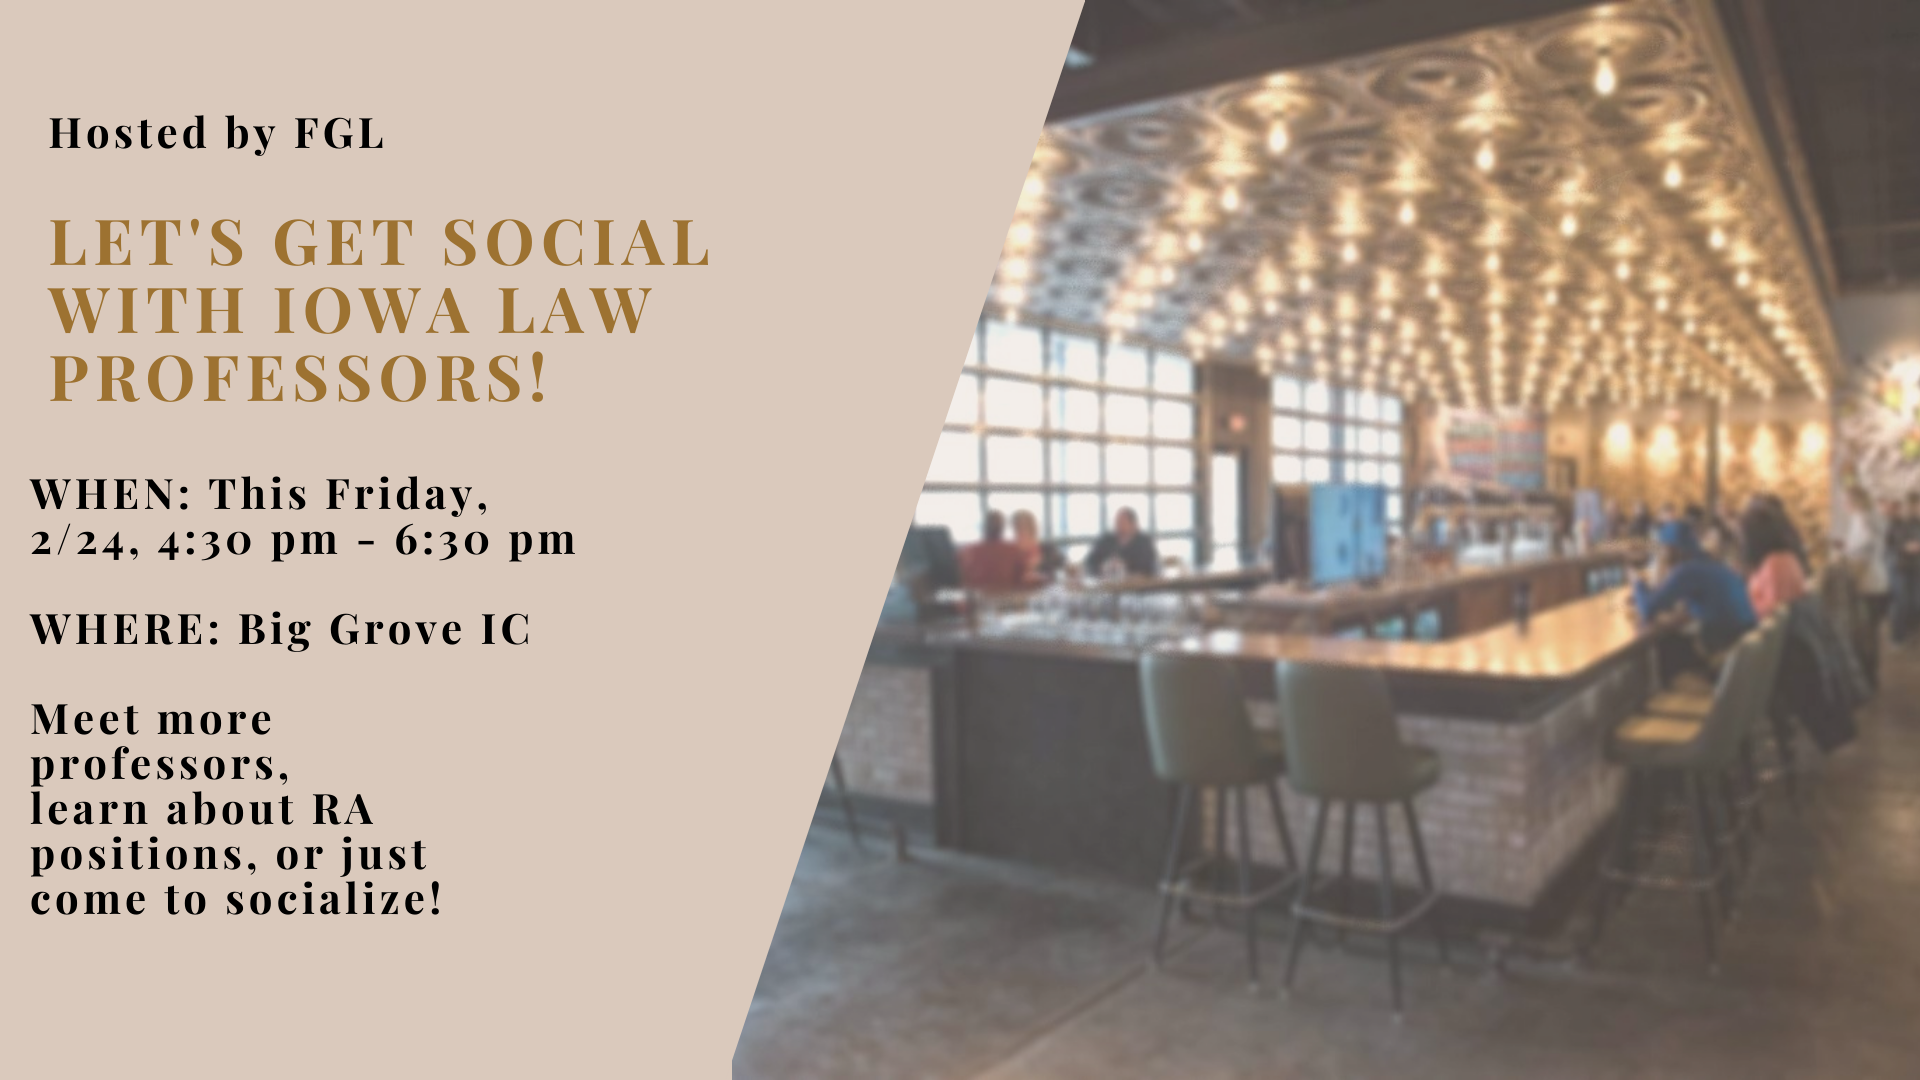 Come hang out for a casual social hour with FGL and Iowa Law professors!        Whether you are looking to meet more professors to help expand your network, learn about research assistant positions, or just socialize with fellow law students, we would love to see you there! The event will be hosted Big Grove on February 24th from 4:30-6:00 pm.